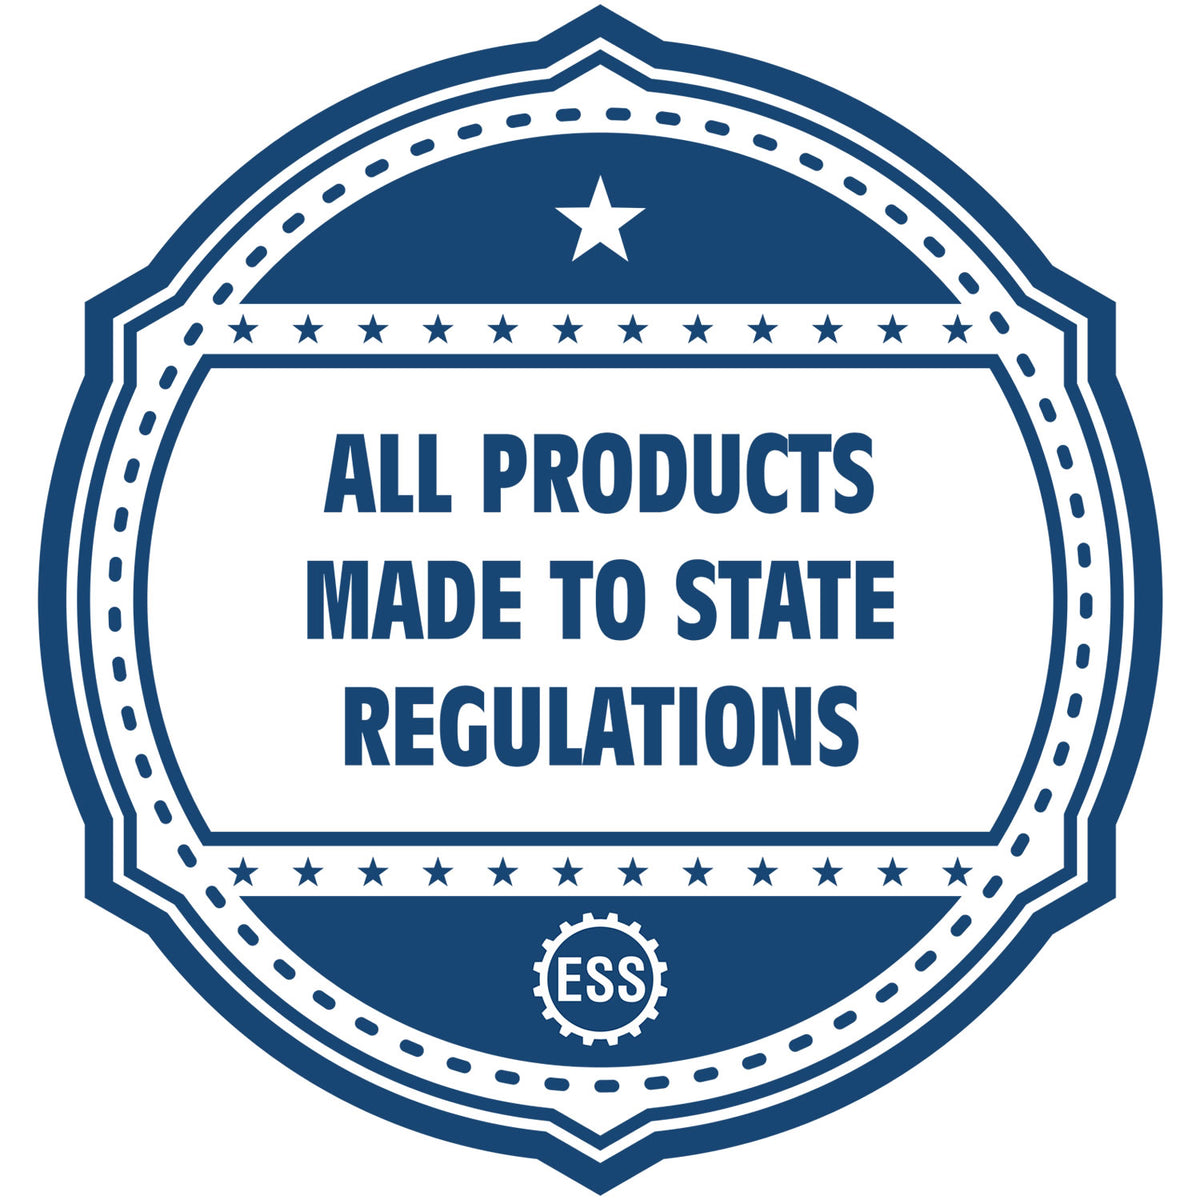 An icon or badge element for the Slim Pre-Inked State Seal Notary Stamp for Nevada showing that this product is made in compliance with state regulations.